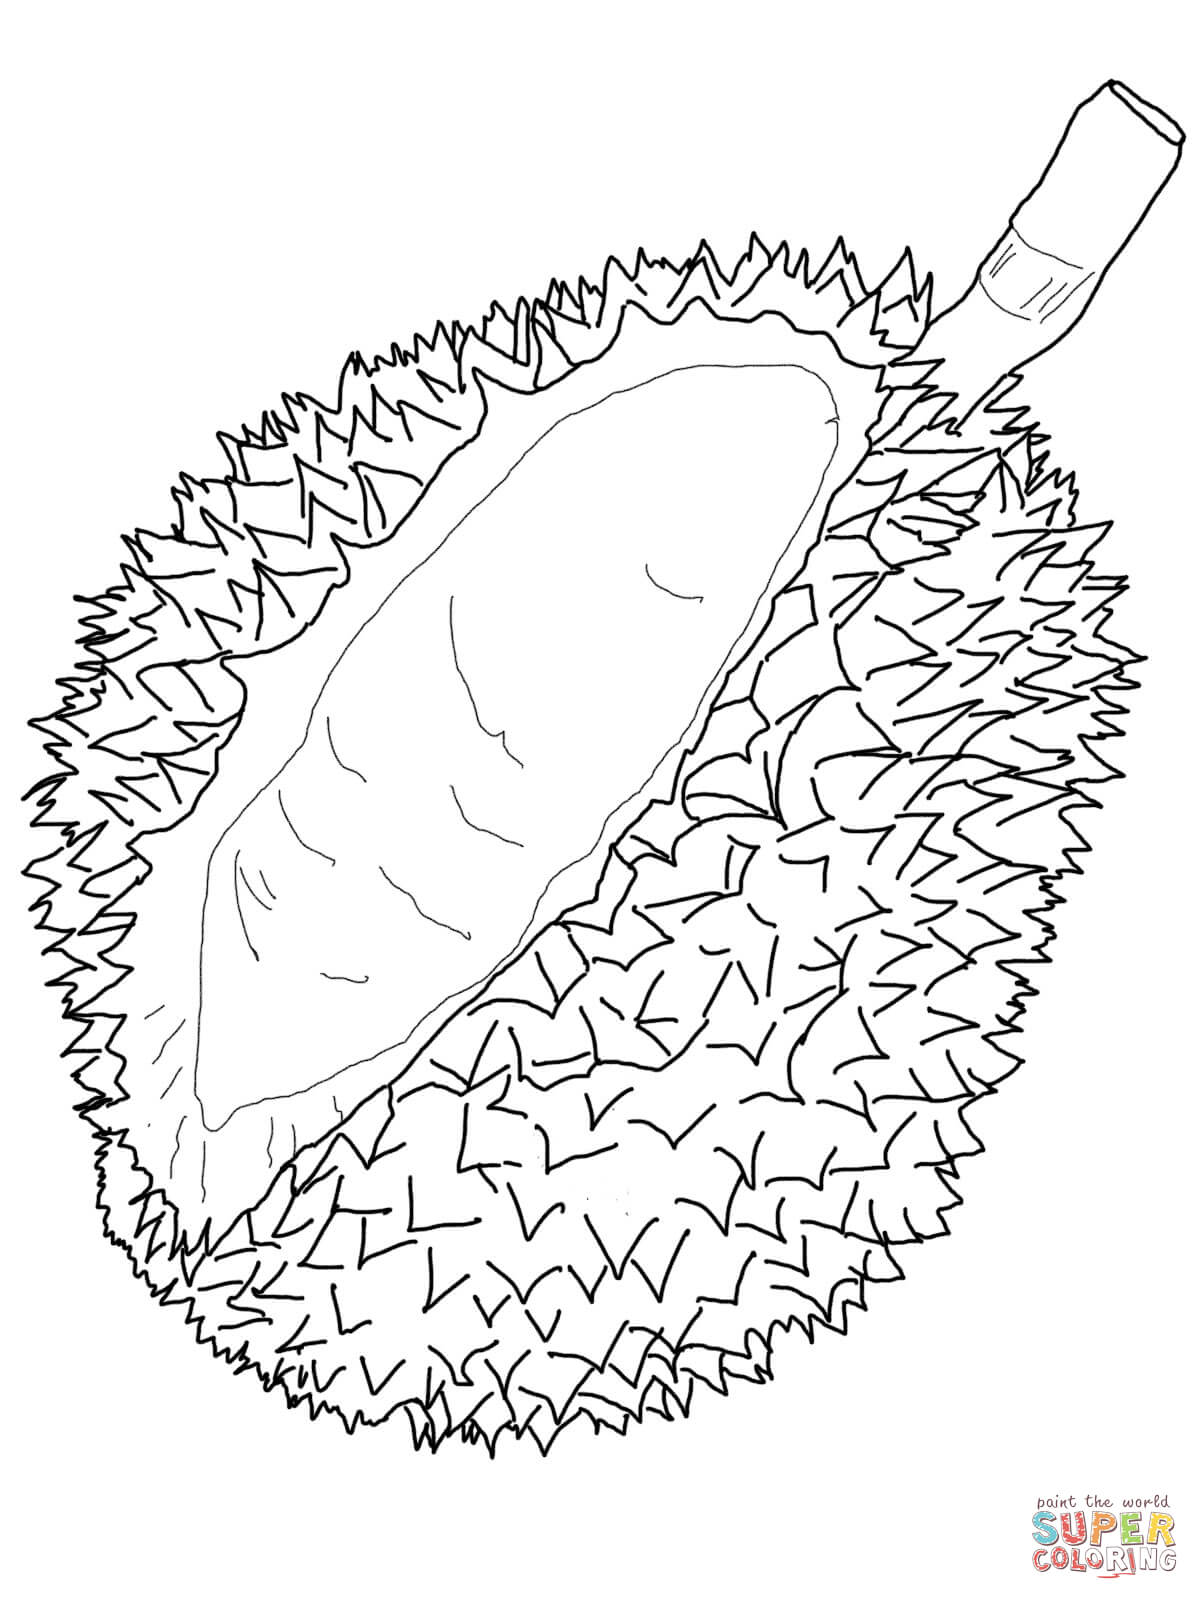 Durian Fruit Coloring Page